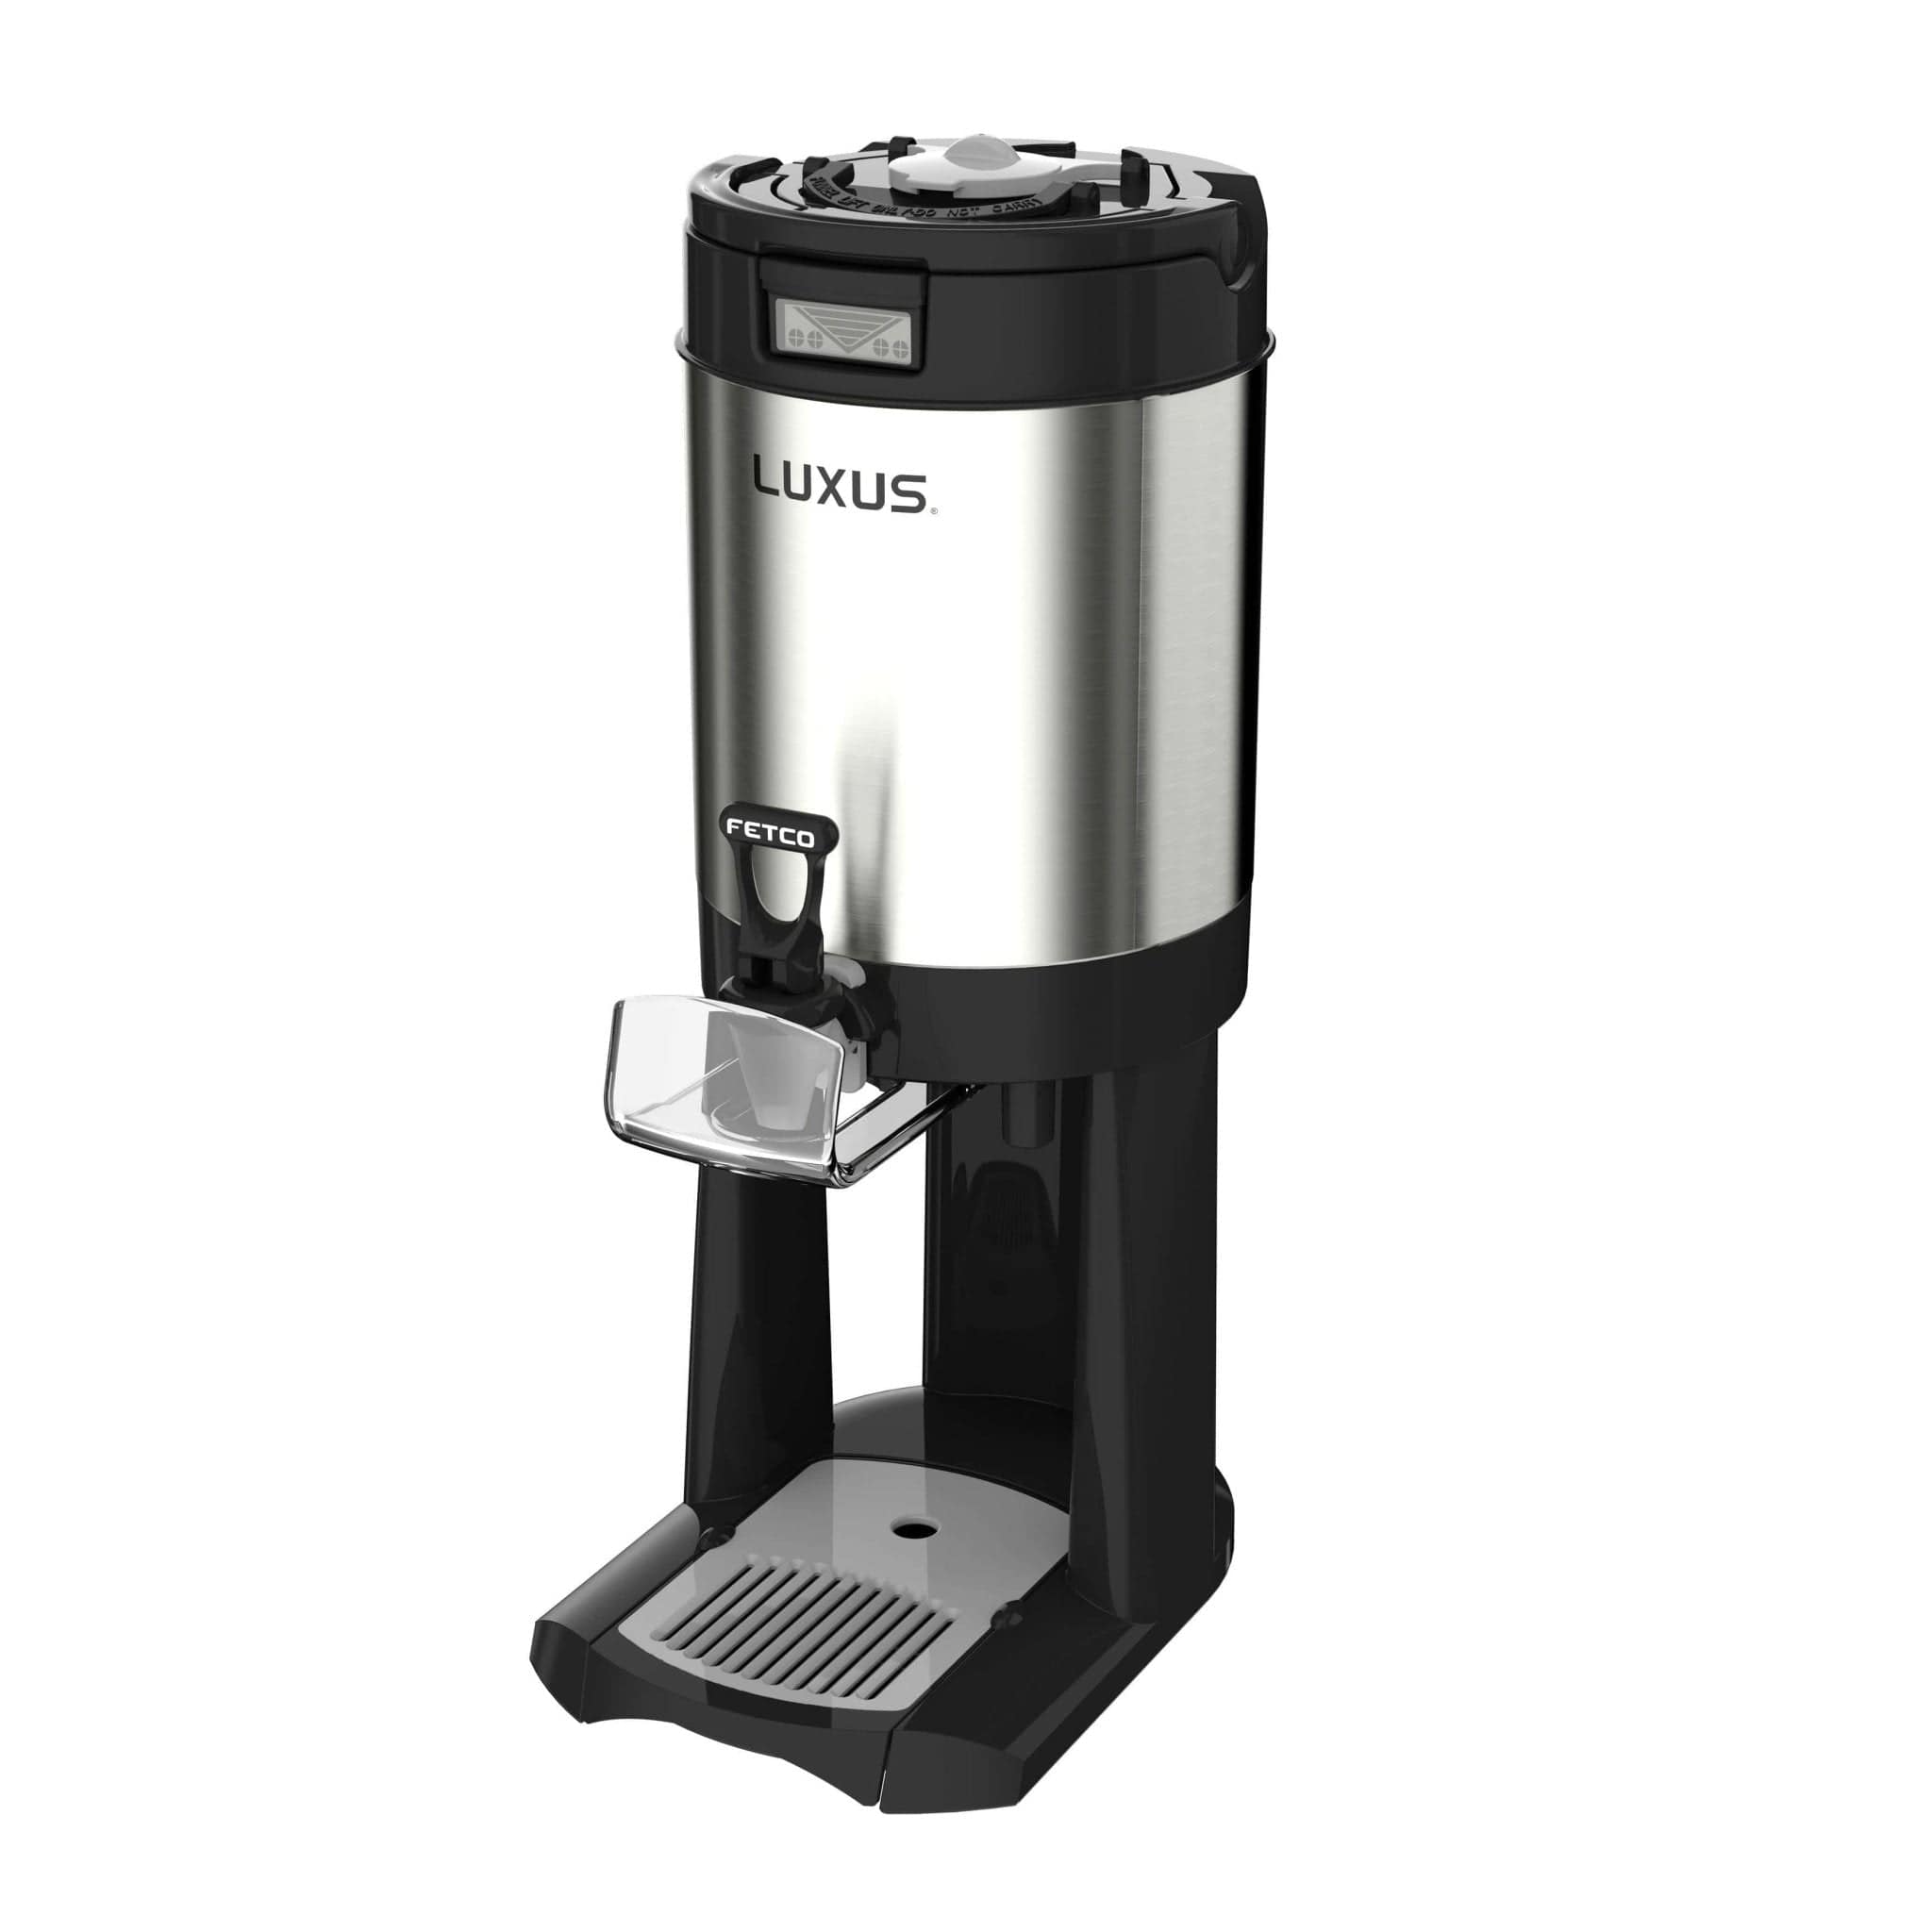 https://cdn.shopify.com/s/files/1/1566/4409/products/fetco-fetco-luxus-thermal-coffee-dispenser-server-stand-1-0-1-5-2-0-gal-beverage-dispensers-1-0-gallon-28204903792704-337512.jpg?v=1699022012